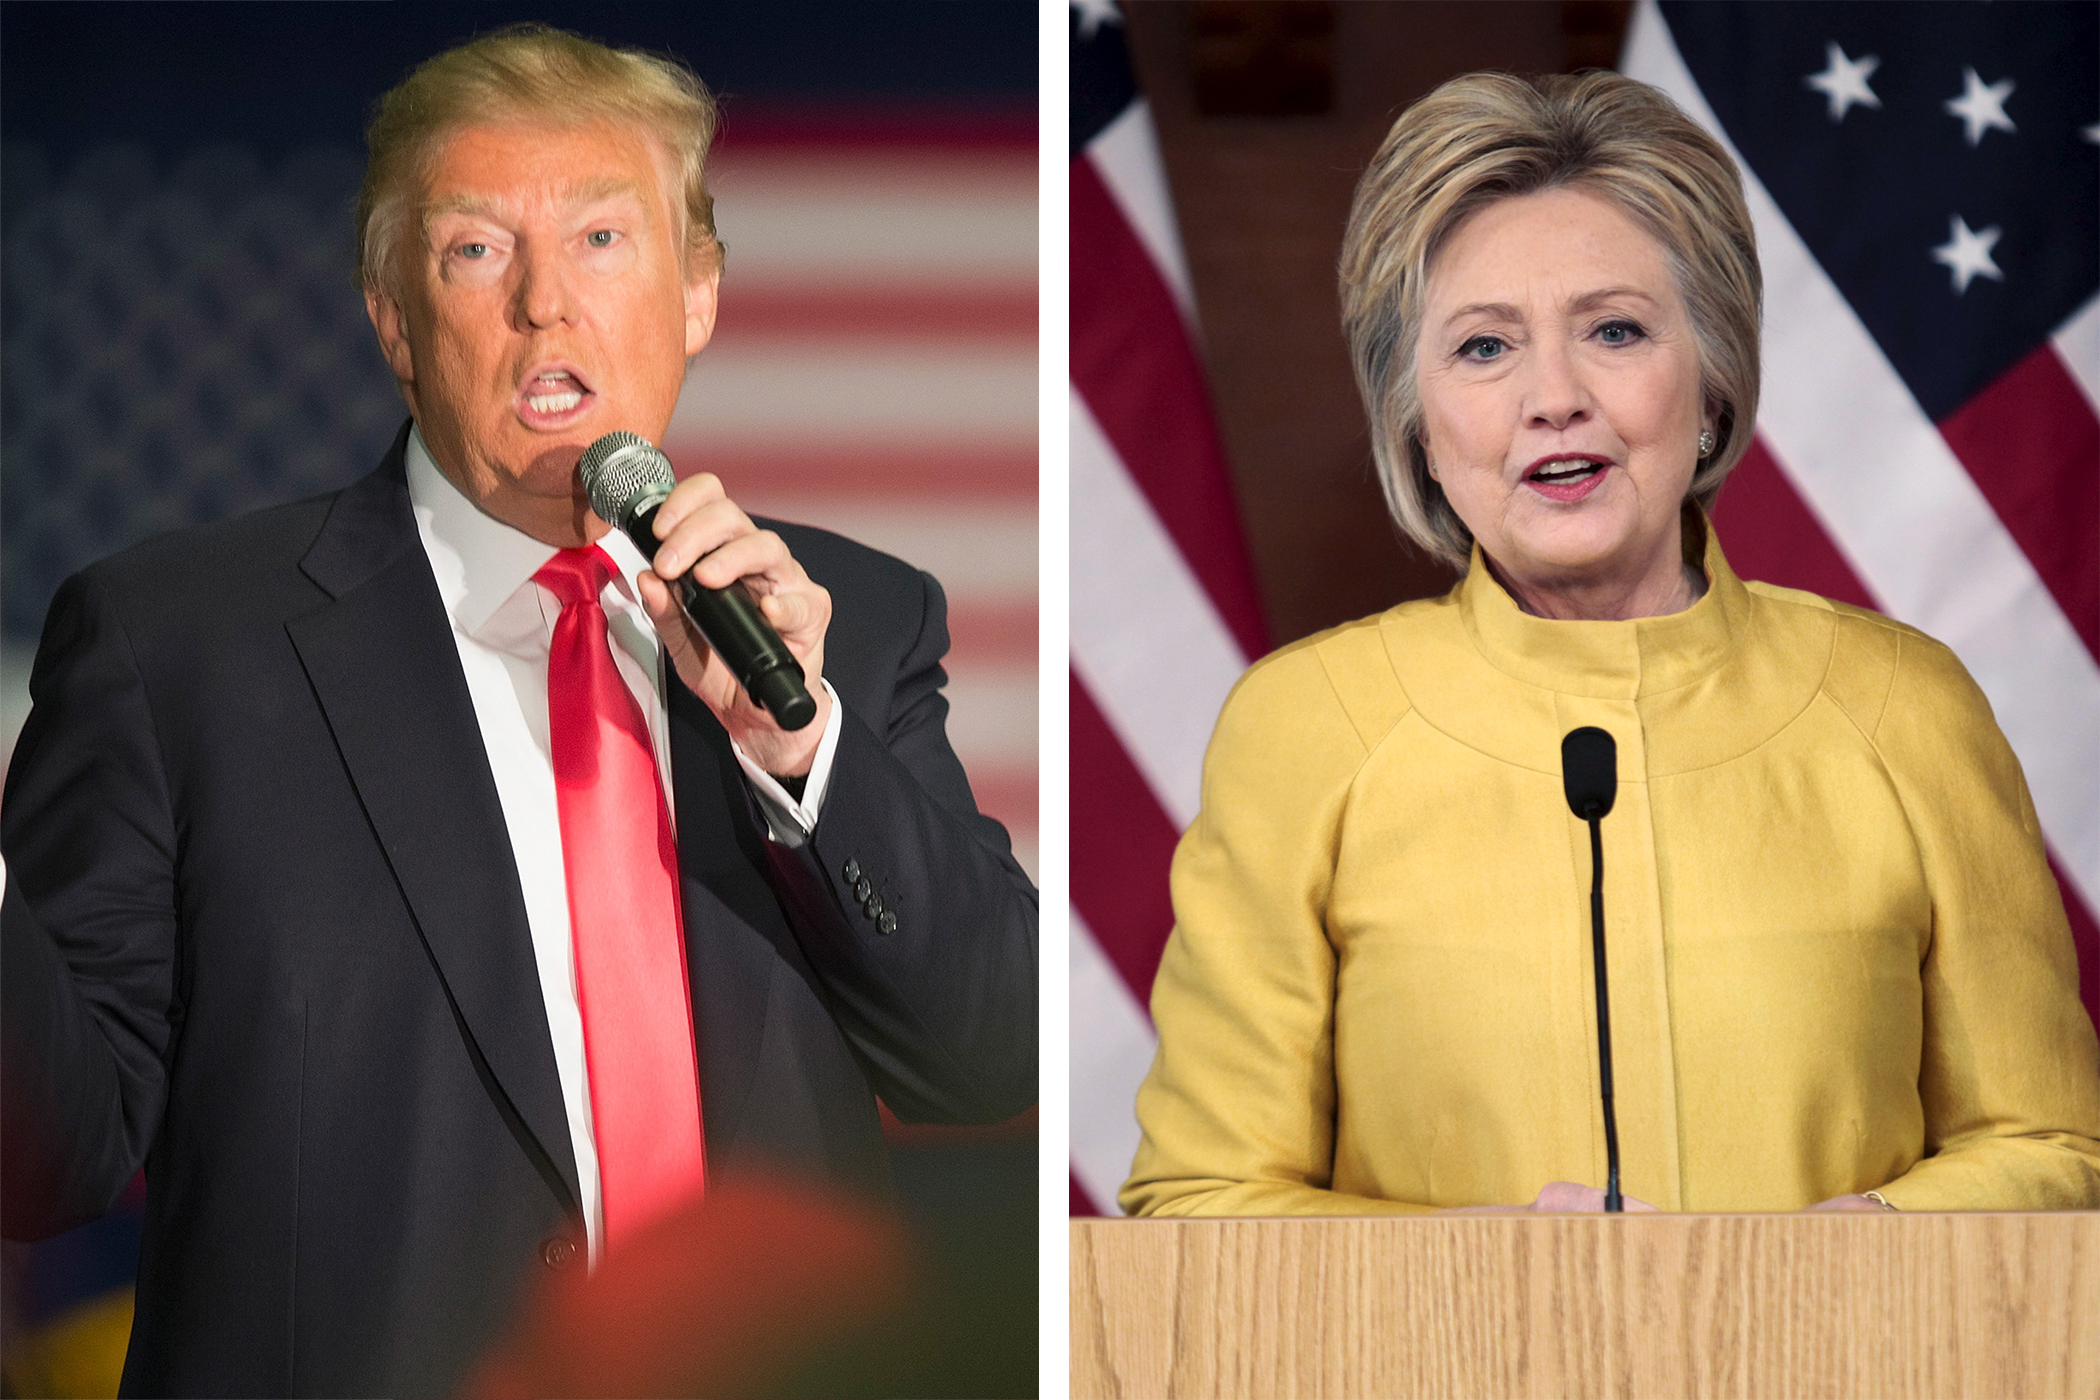 (left) Republican presidential candidate Donald Trump; (right) Democratic presidential candidate Hillary Clinton ((left) Getty Images; (right) Reuters)